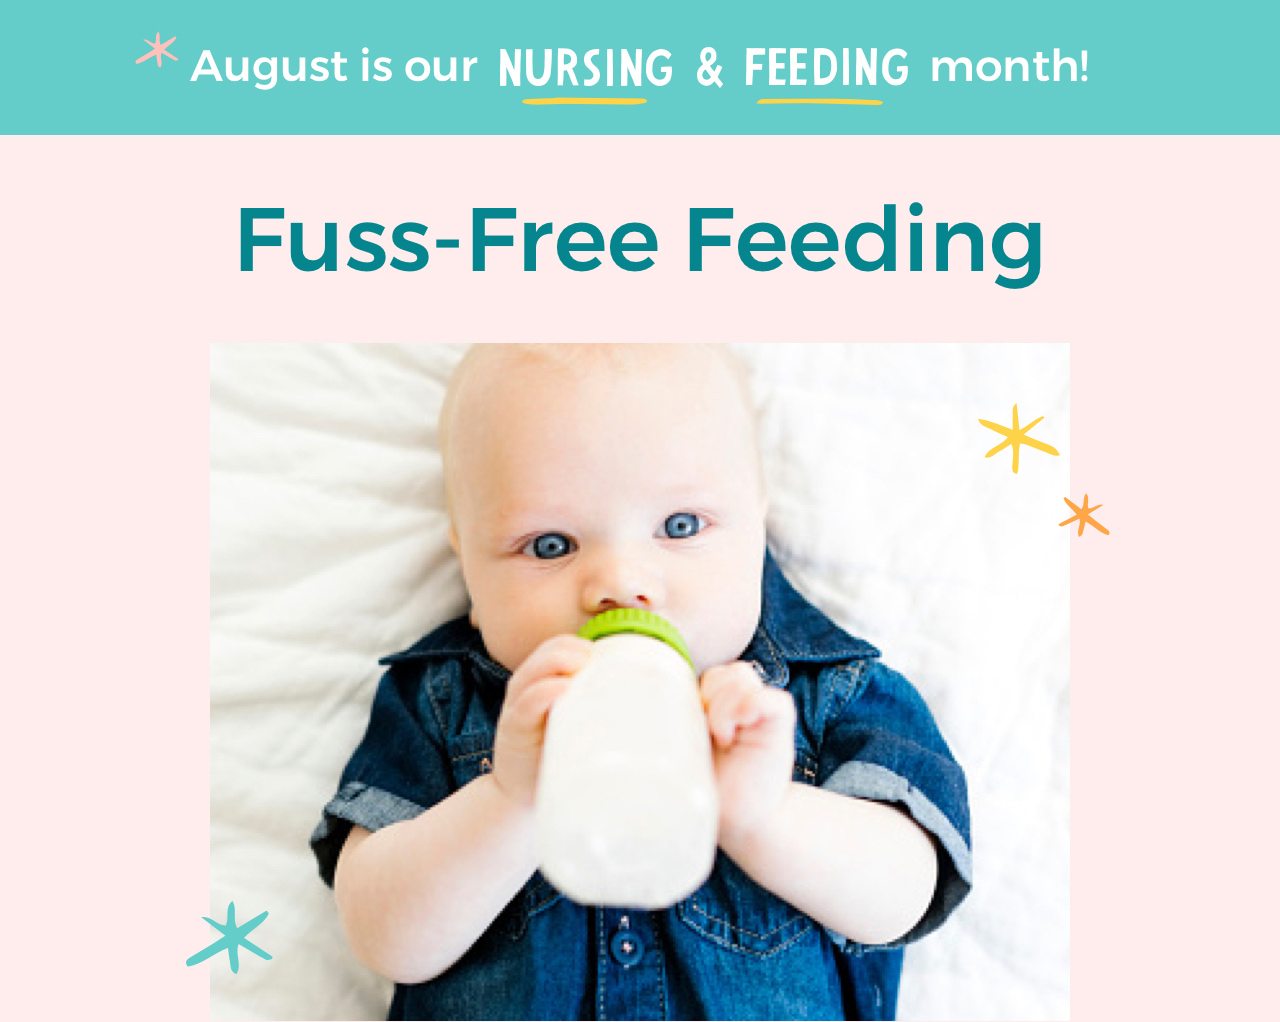 Fuss-Free Feeding Feeding time shouldn’t stress you or your baby—not when we’ve got the goods to master the routine and make it fun.